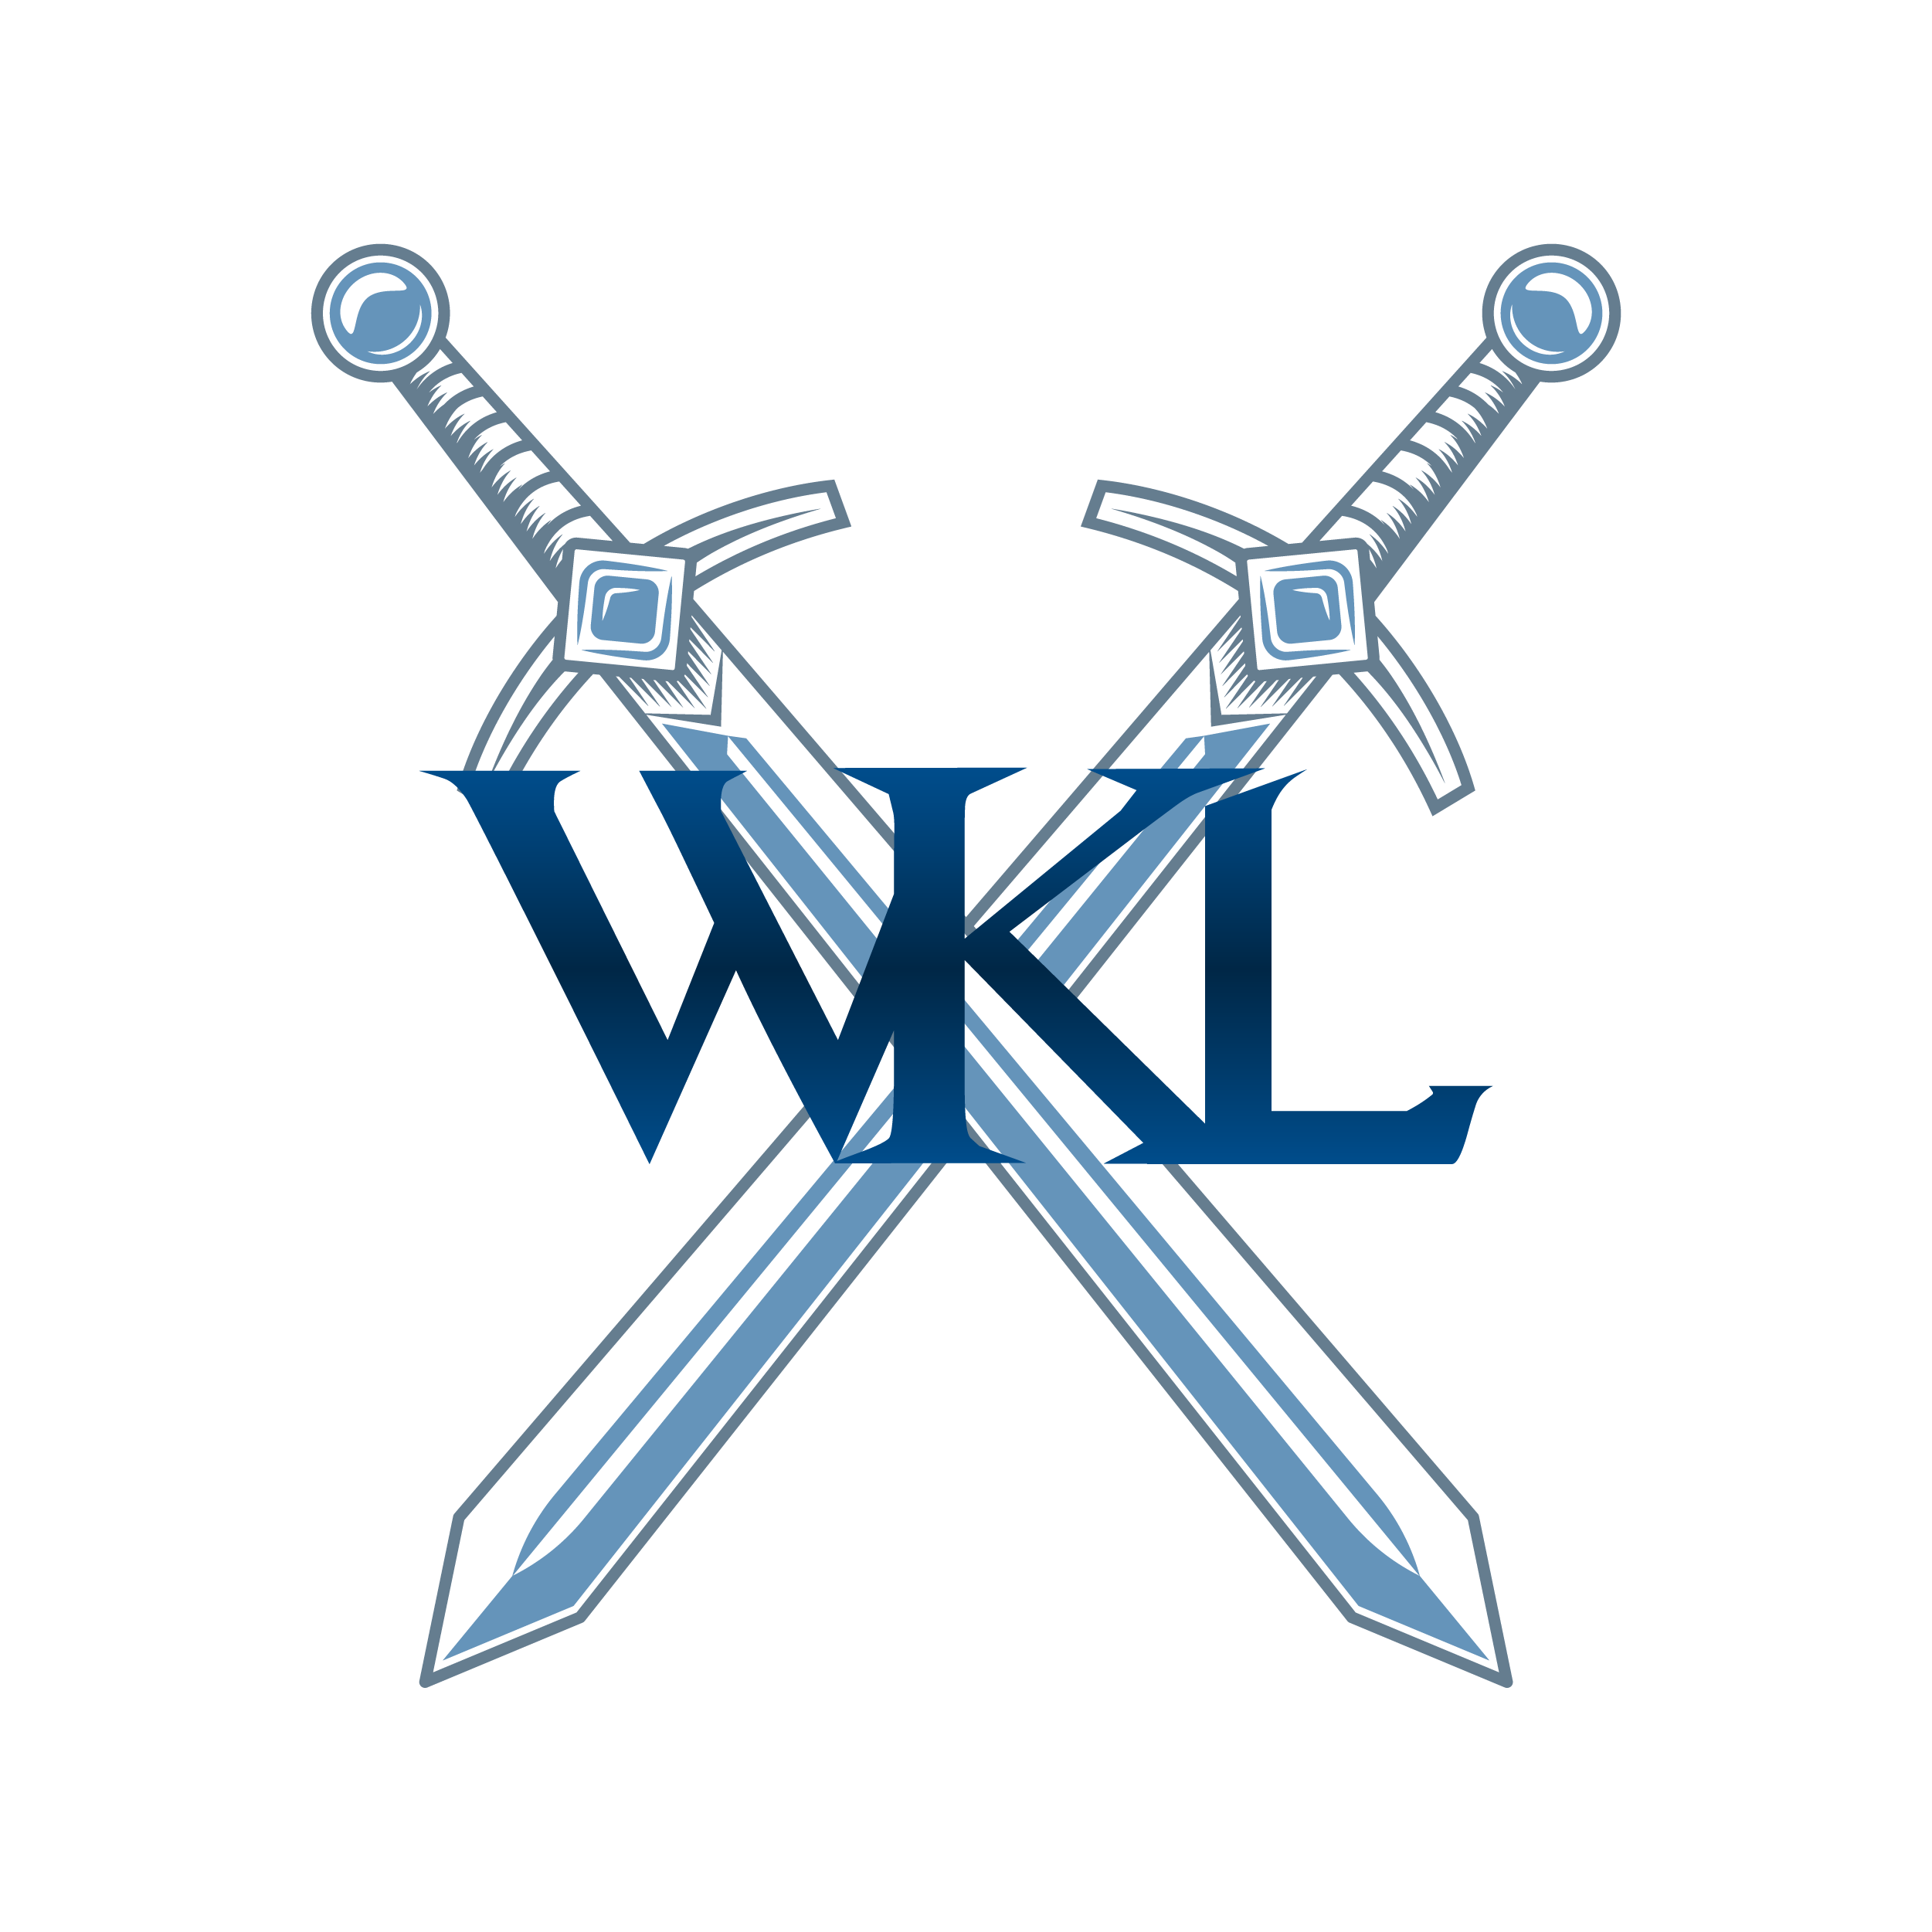 White Knight Labs logo with WKL text and crossed swords.